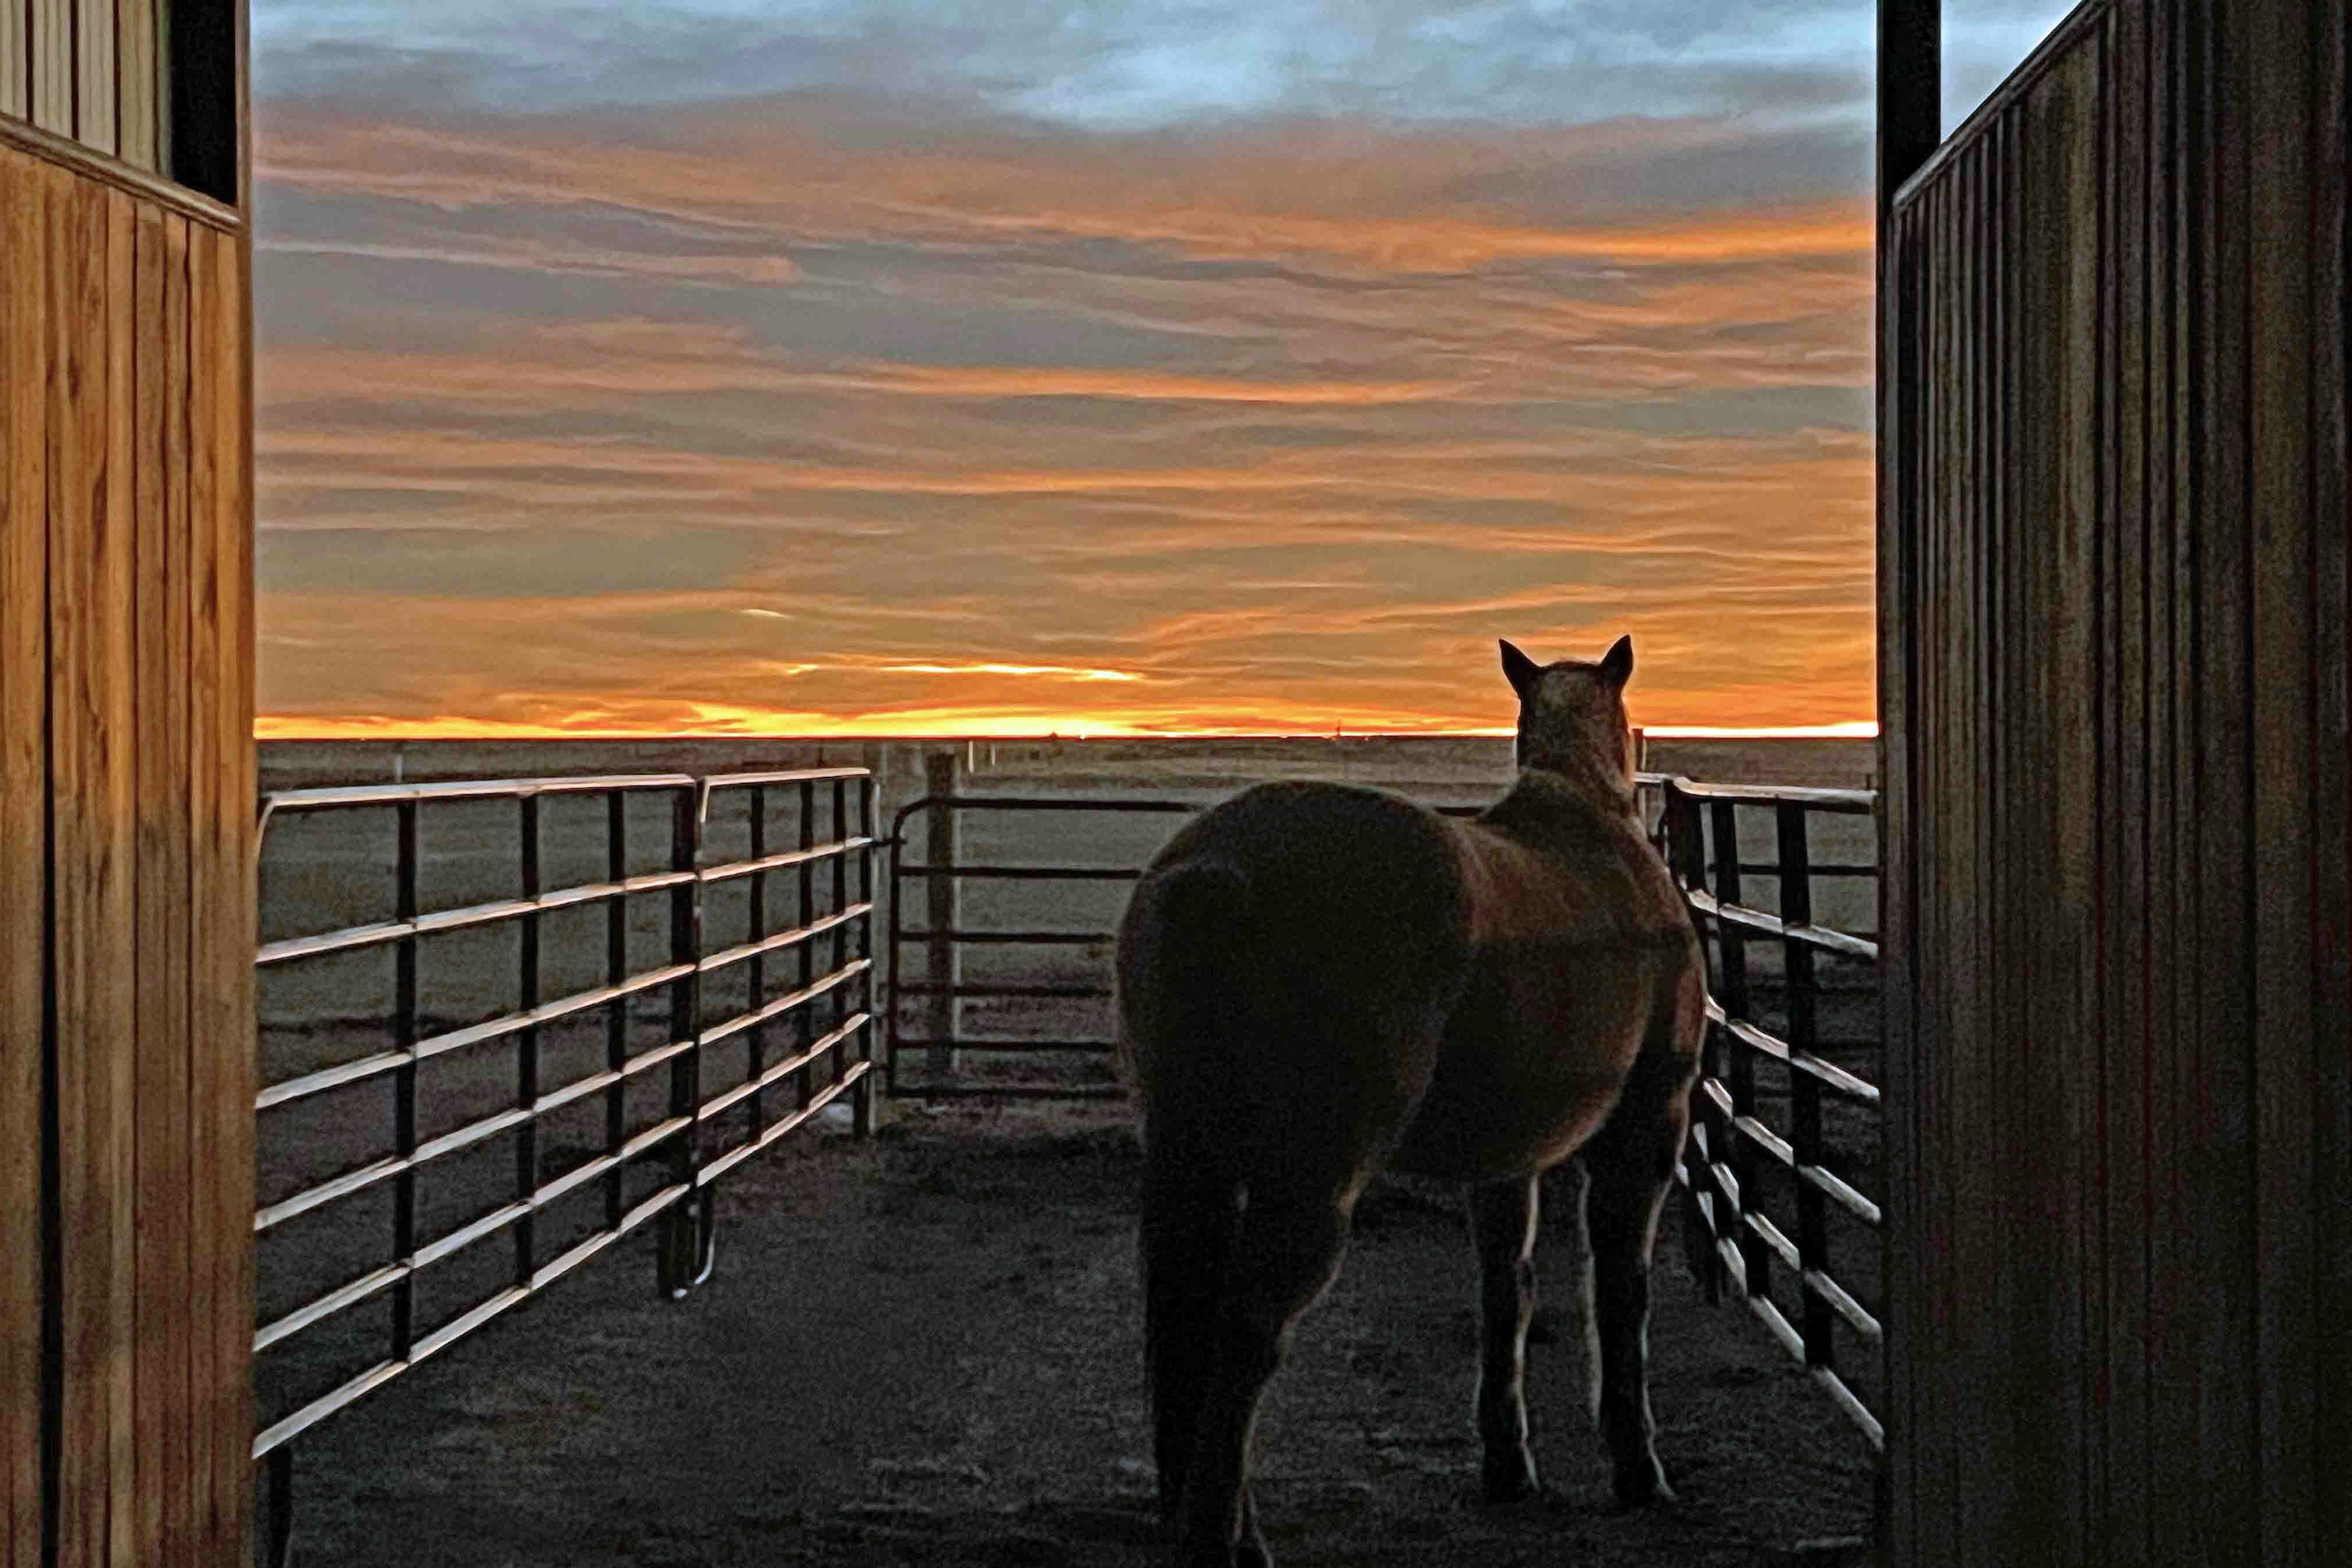 "Good morning from northwestern Laramie County. I'm envious of my gelding's sunrise theatre every morning."